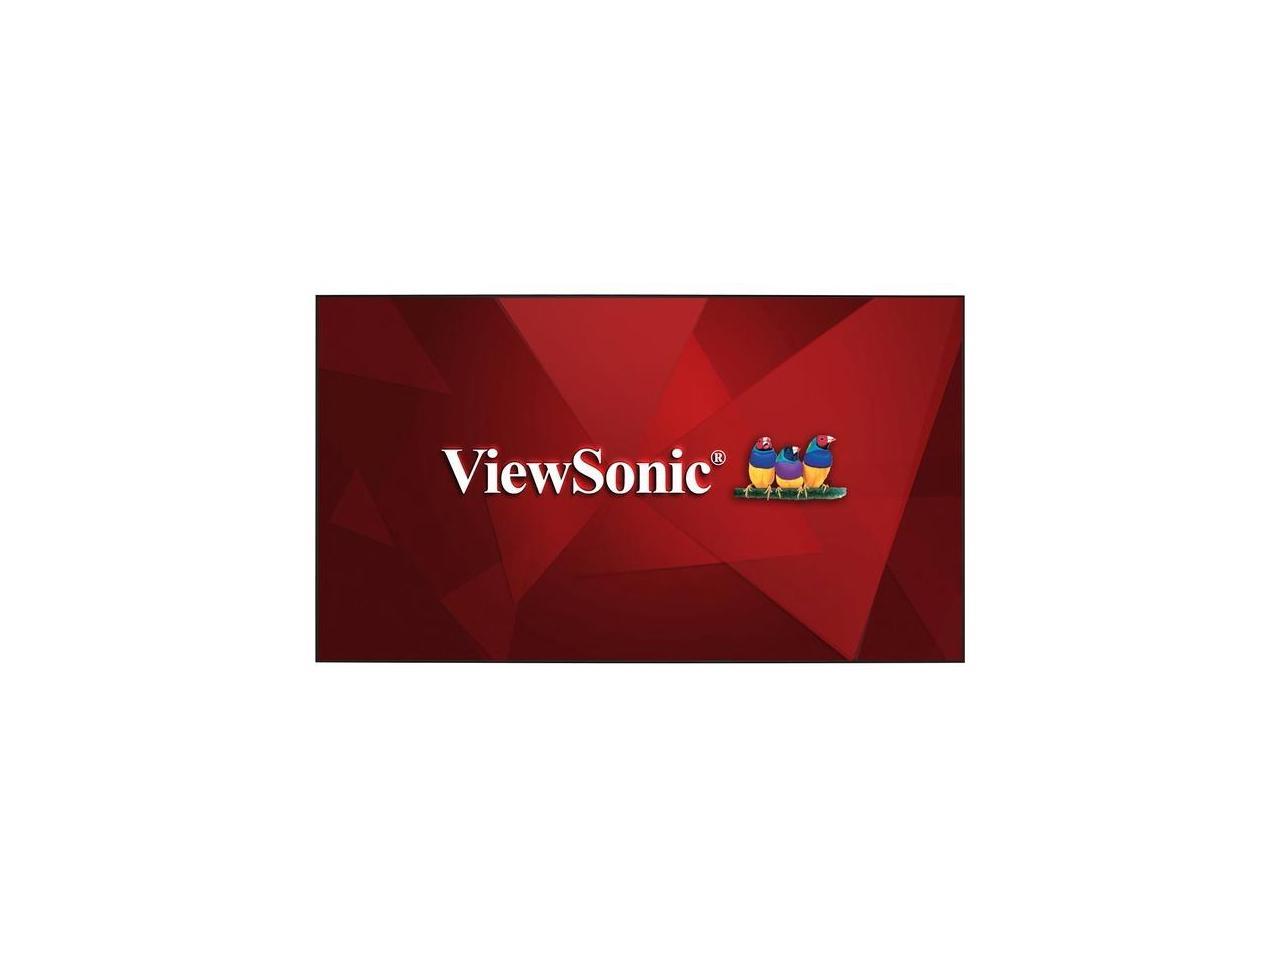 ViewSonic BCP100 100" 1080P 1920 x 1080, 16:9 Wide Viewing Angles Projector Screen